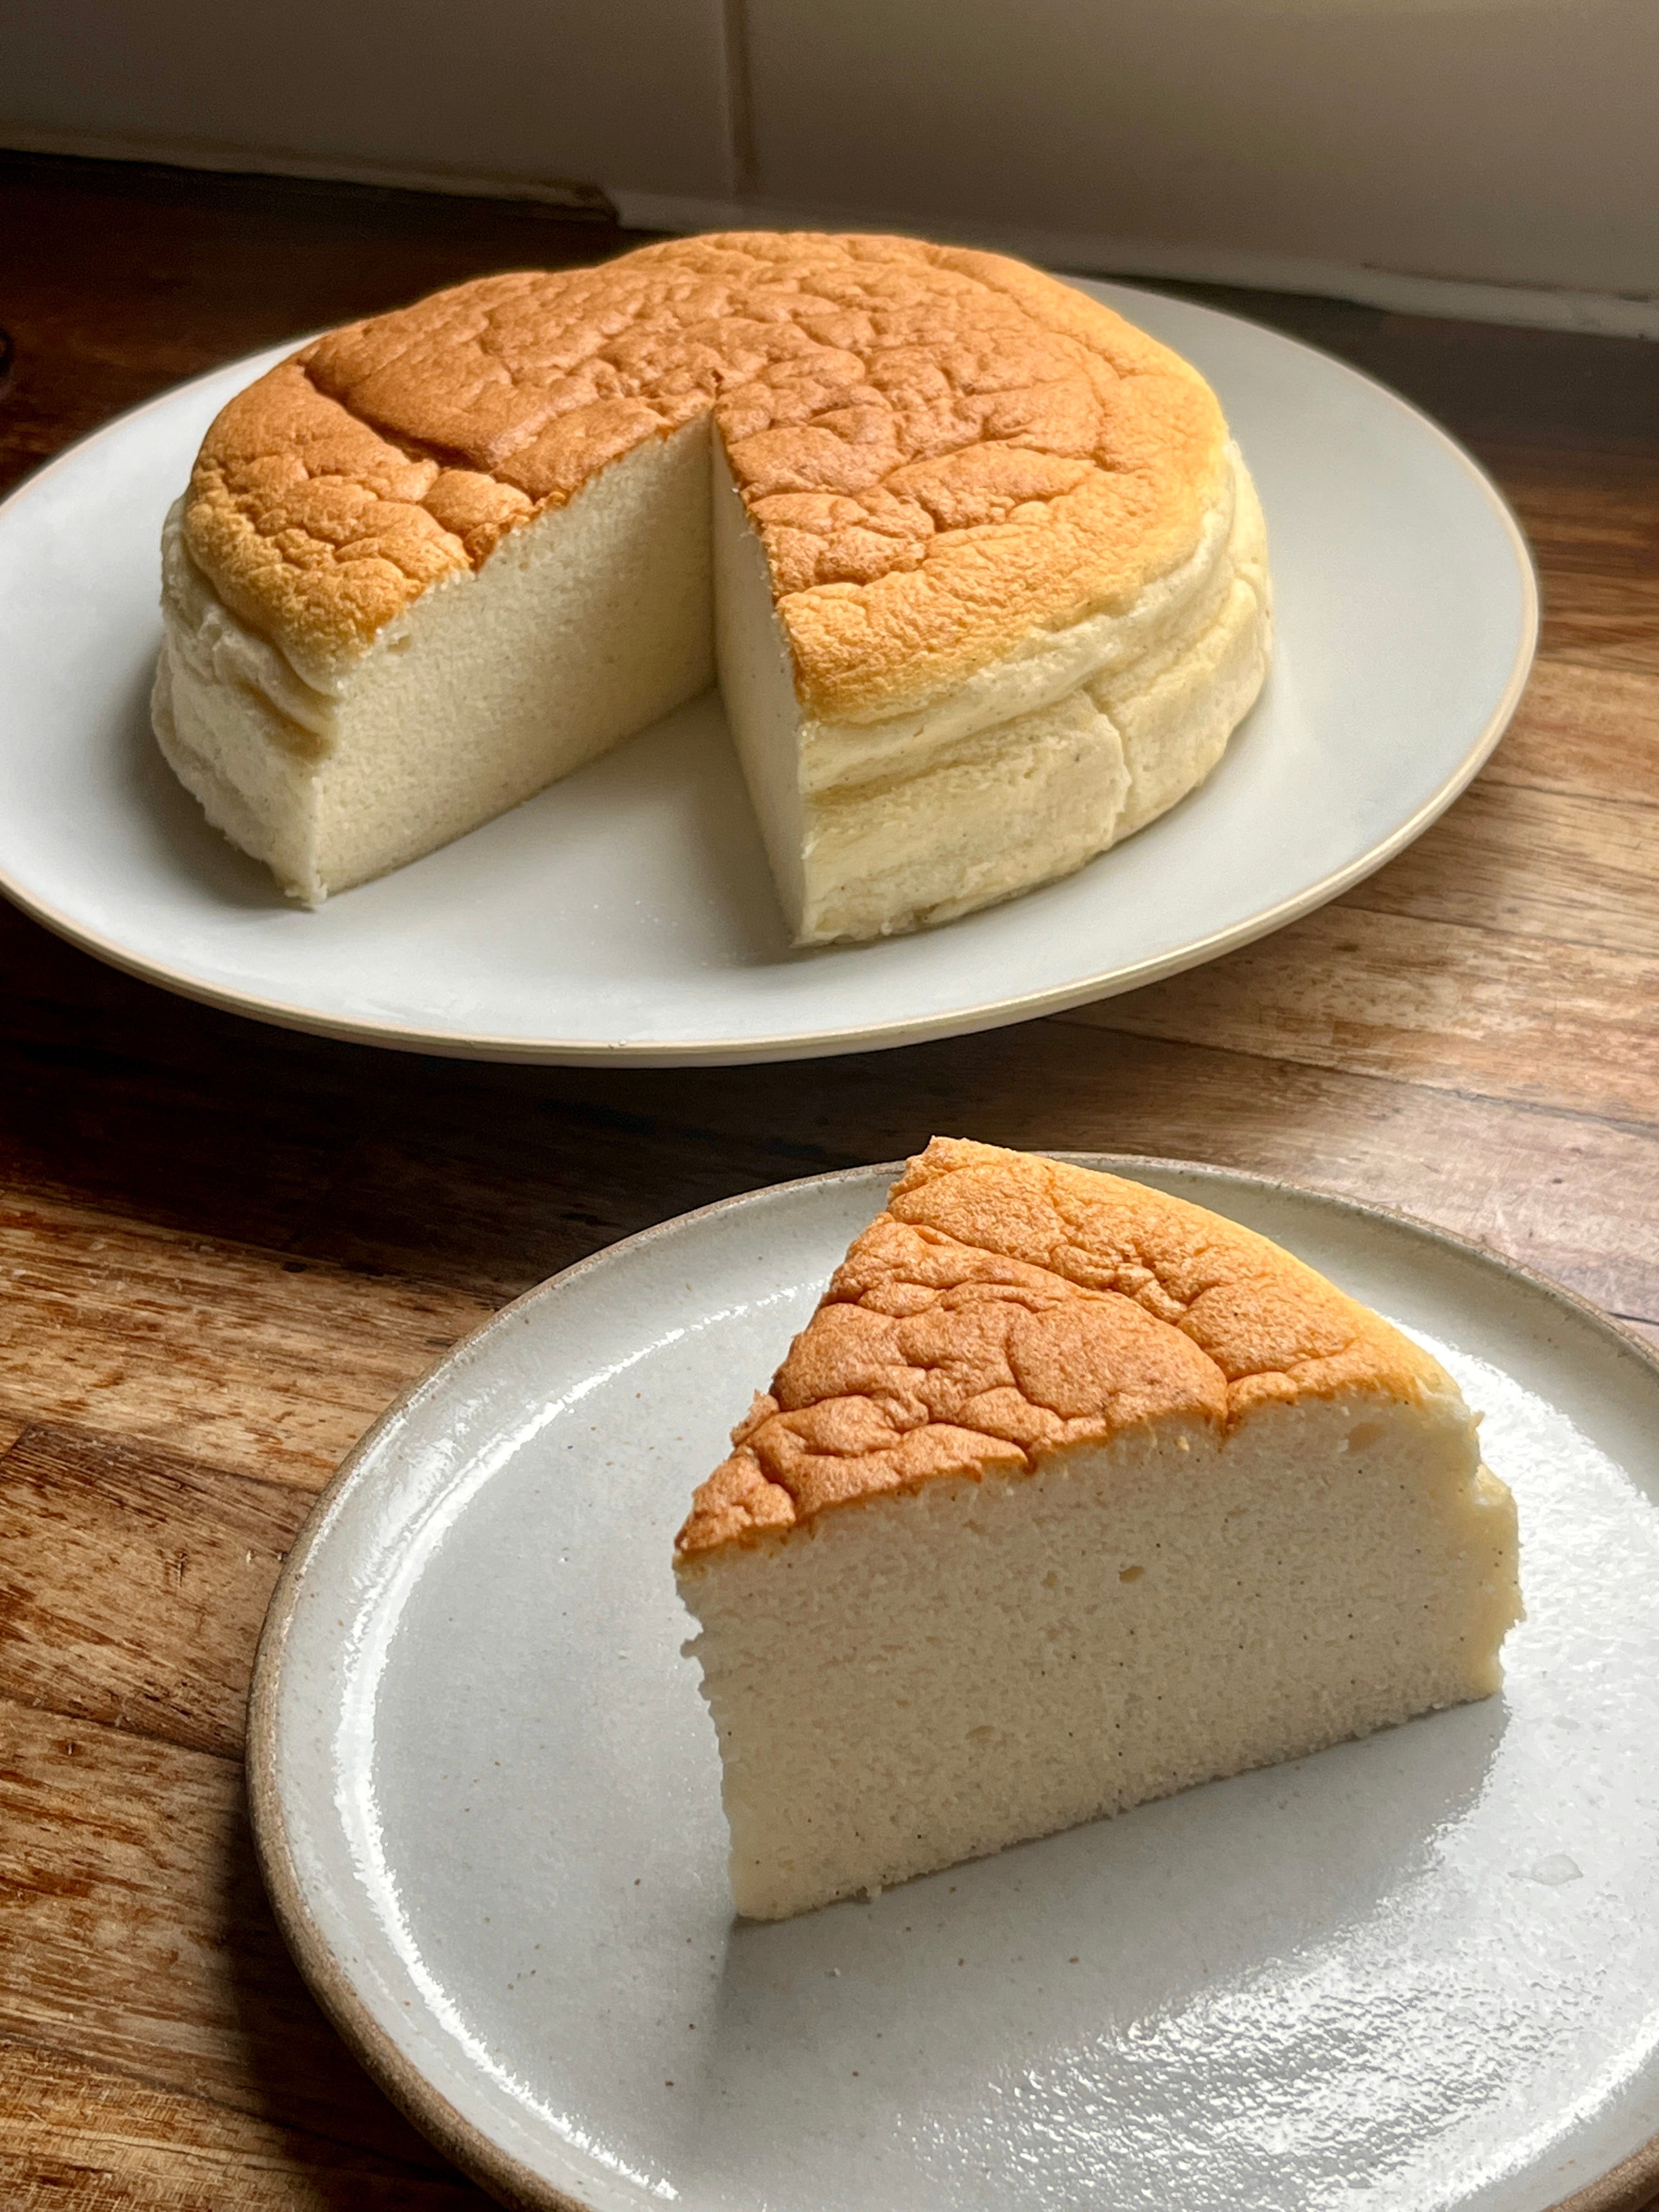 Japanese sponge cake - How to make the most cottony and bouncy cake